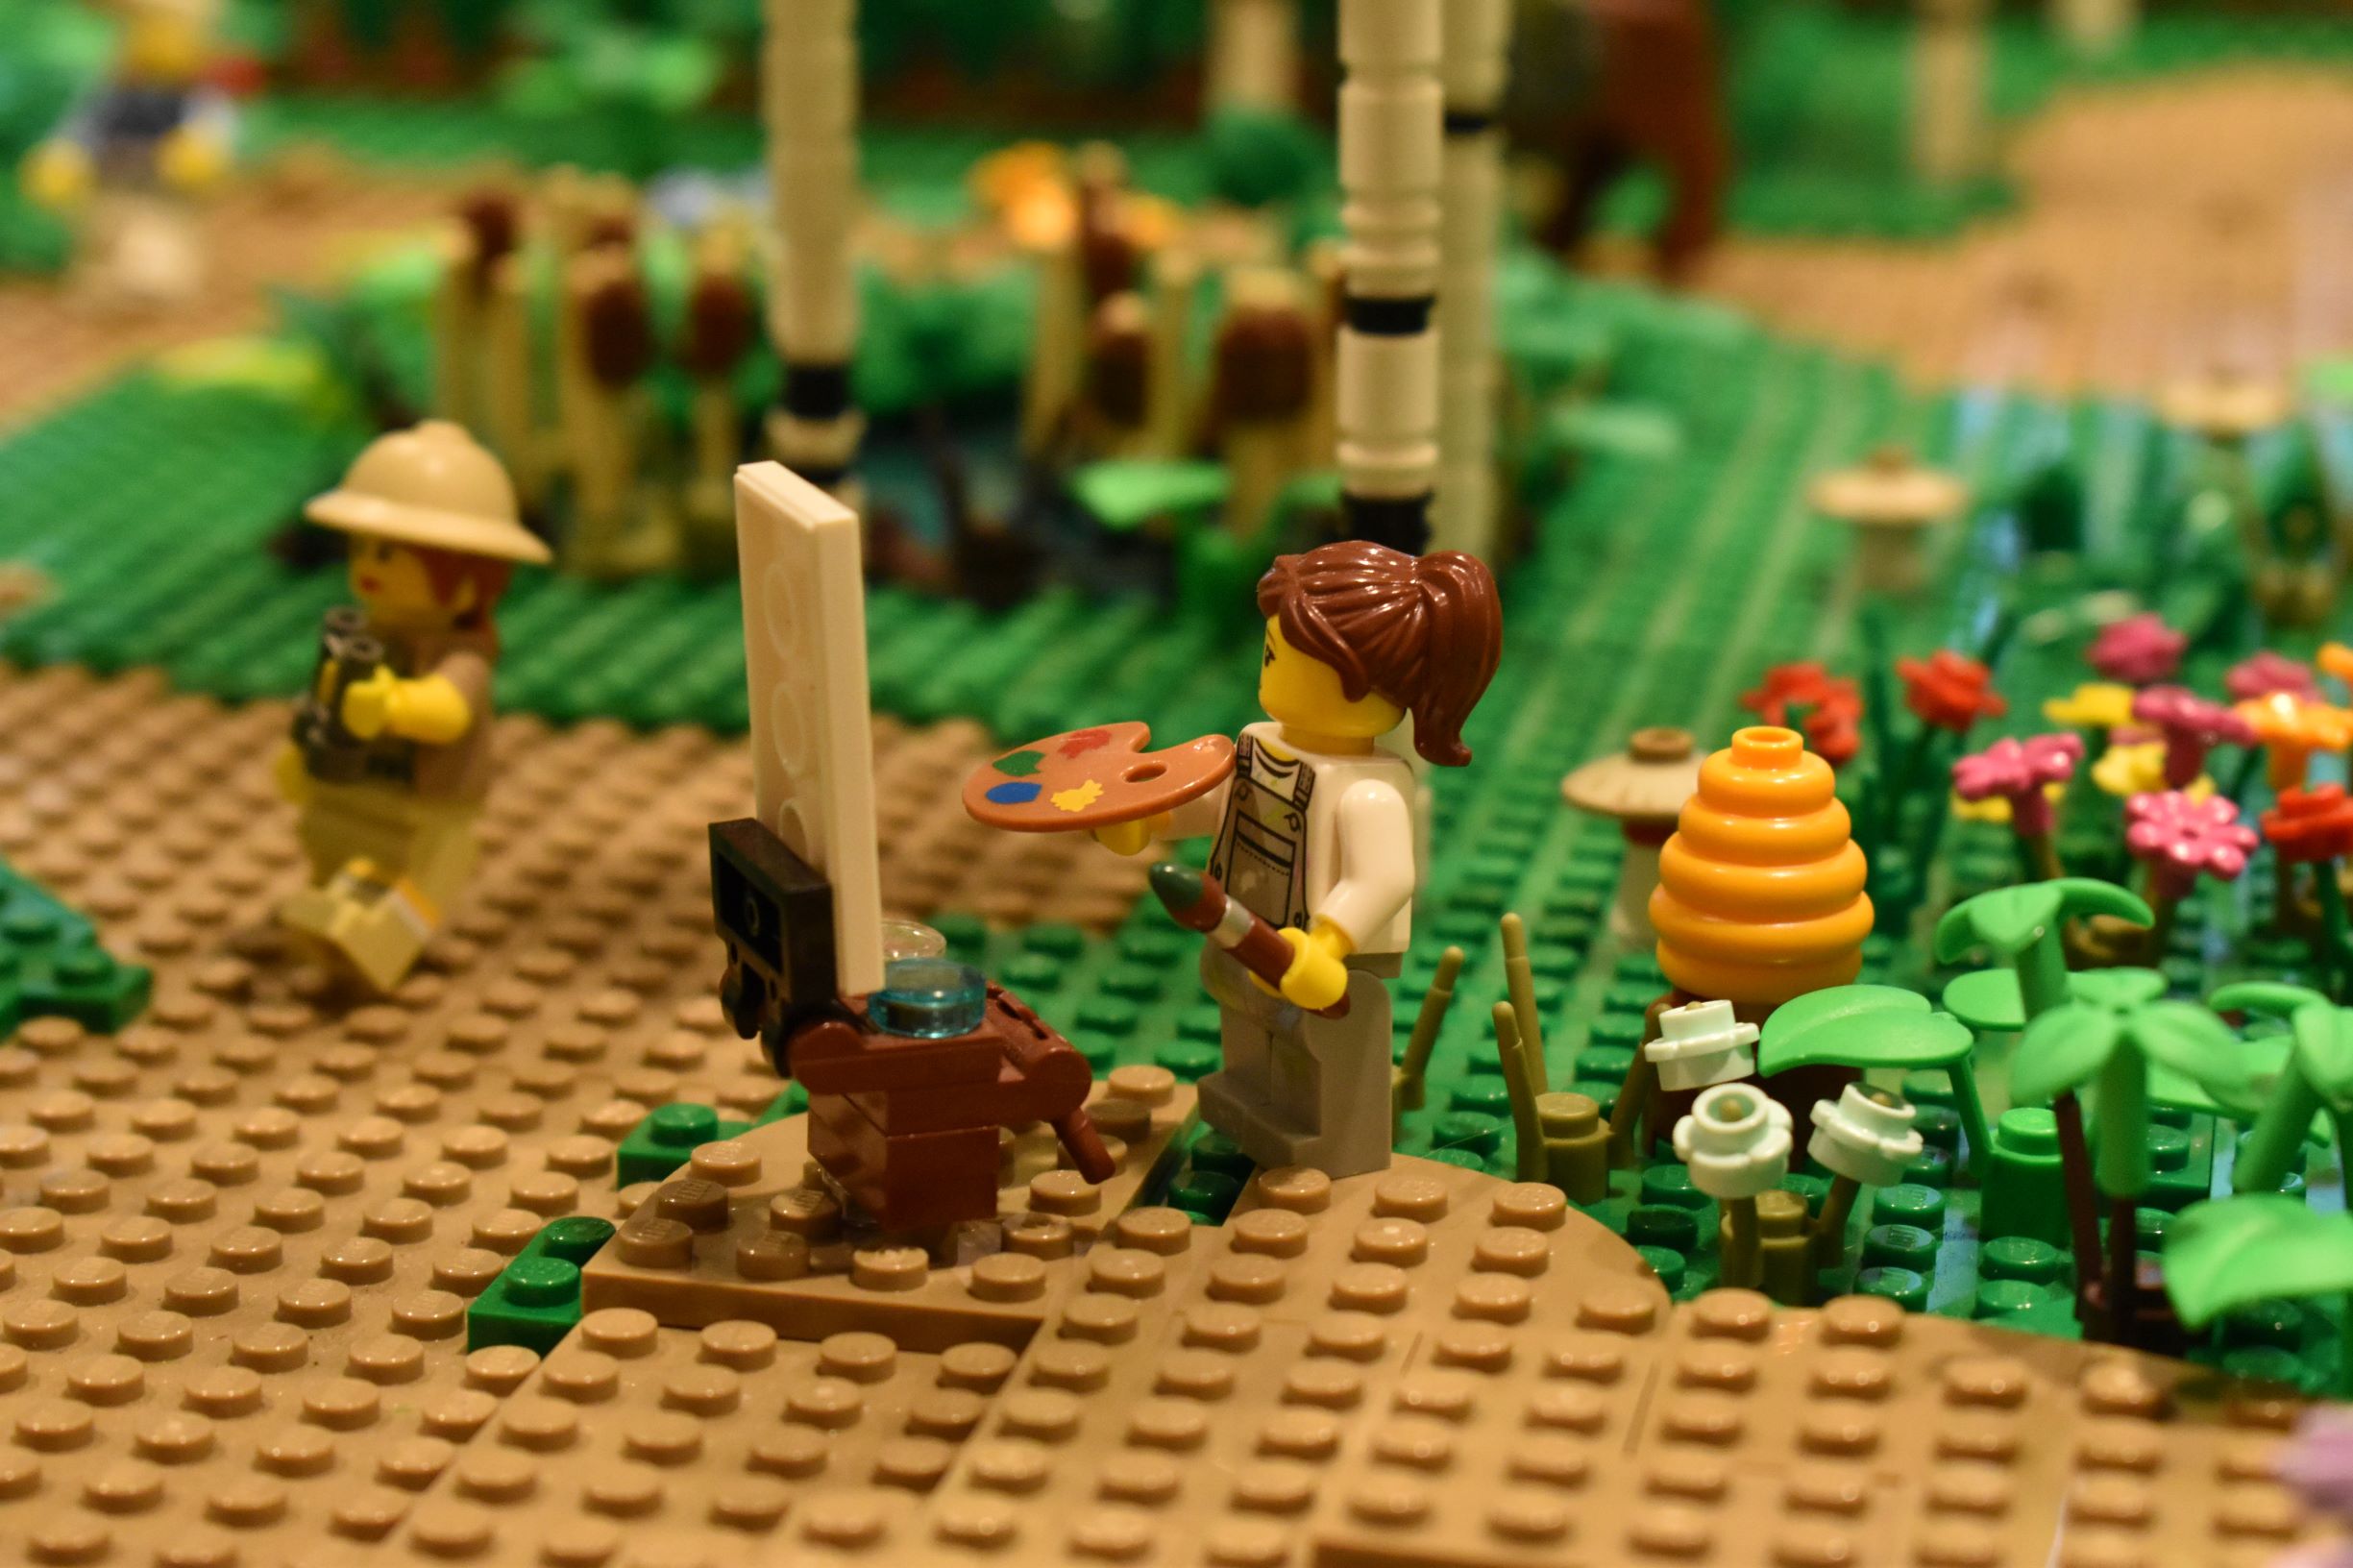 Think Outside the Brick: The Creative Art of LEGO® 2021 detail image